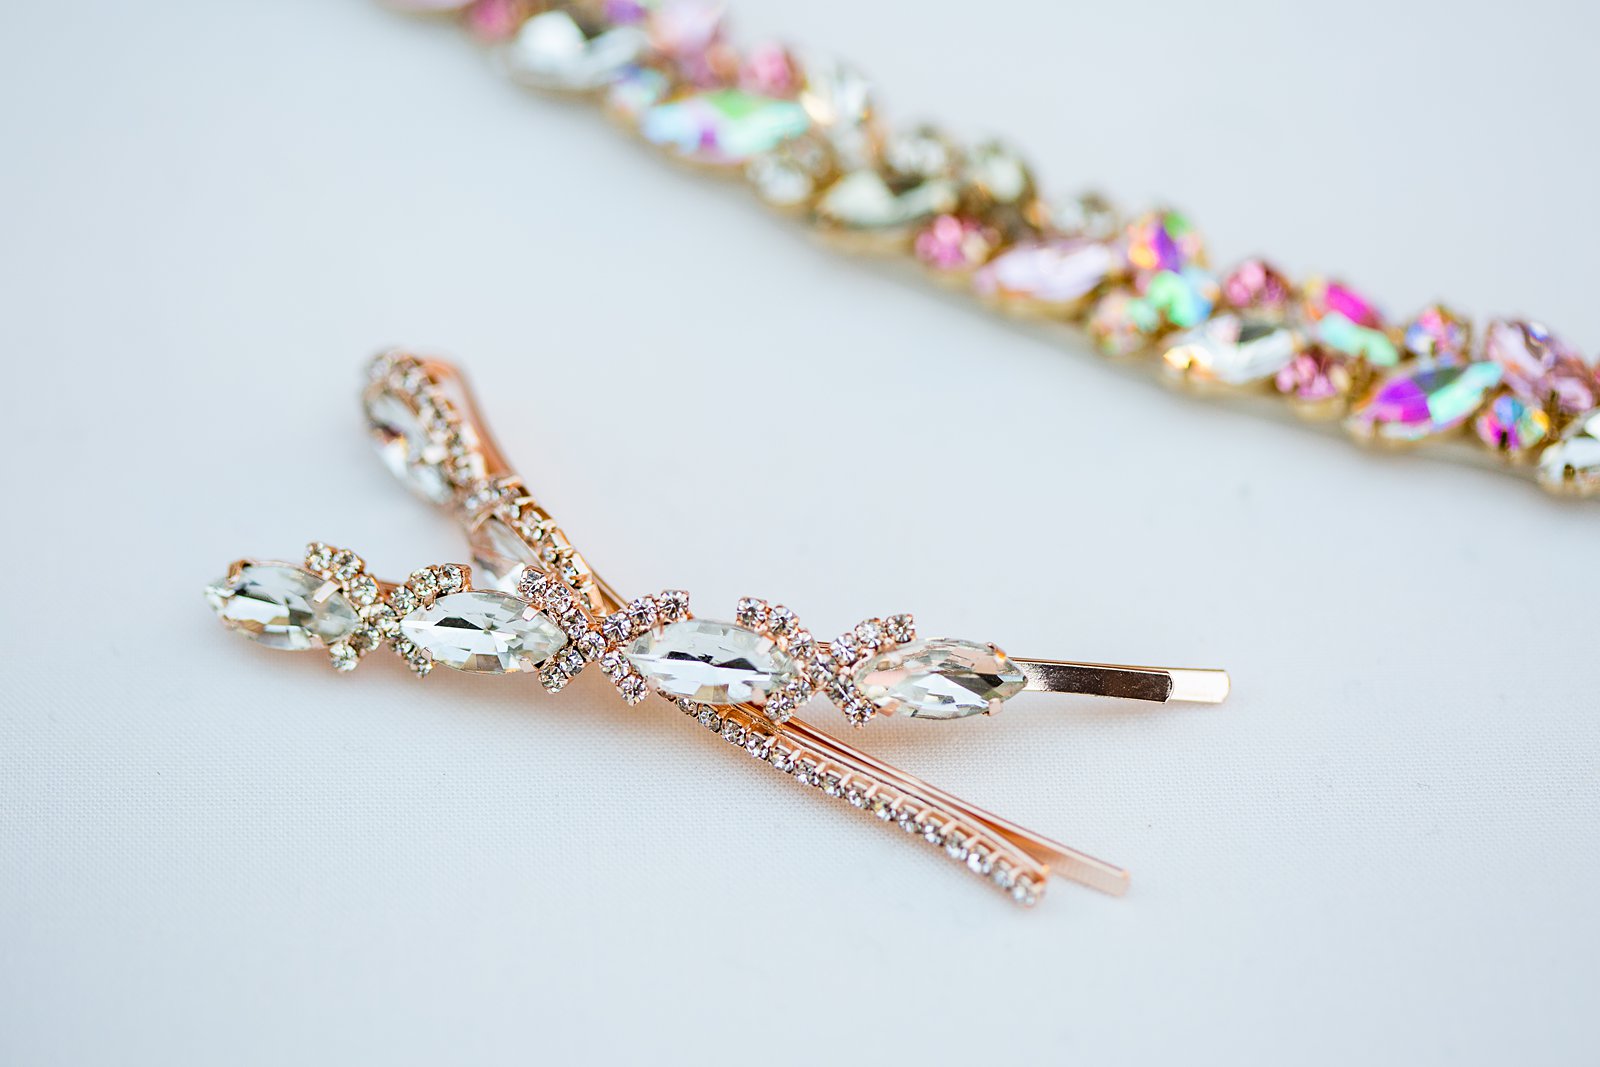 Brides's wedding day details of rose gold hair clips by PMA Photography.